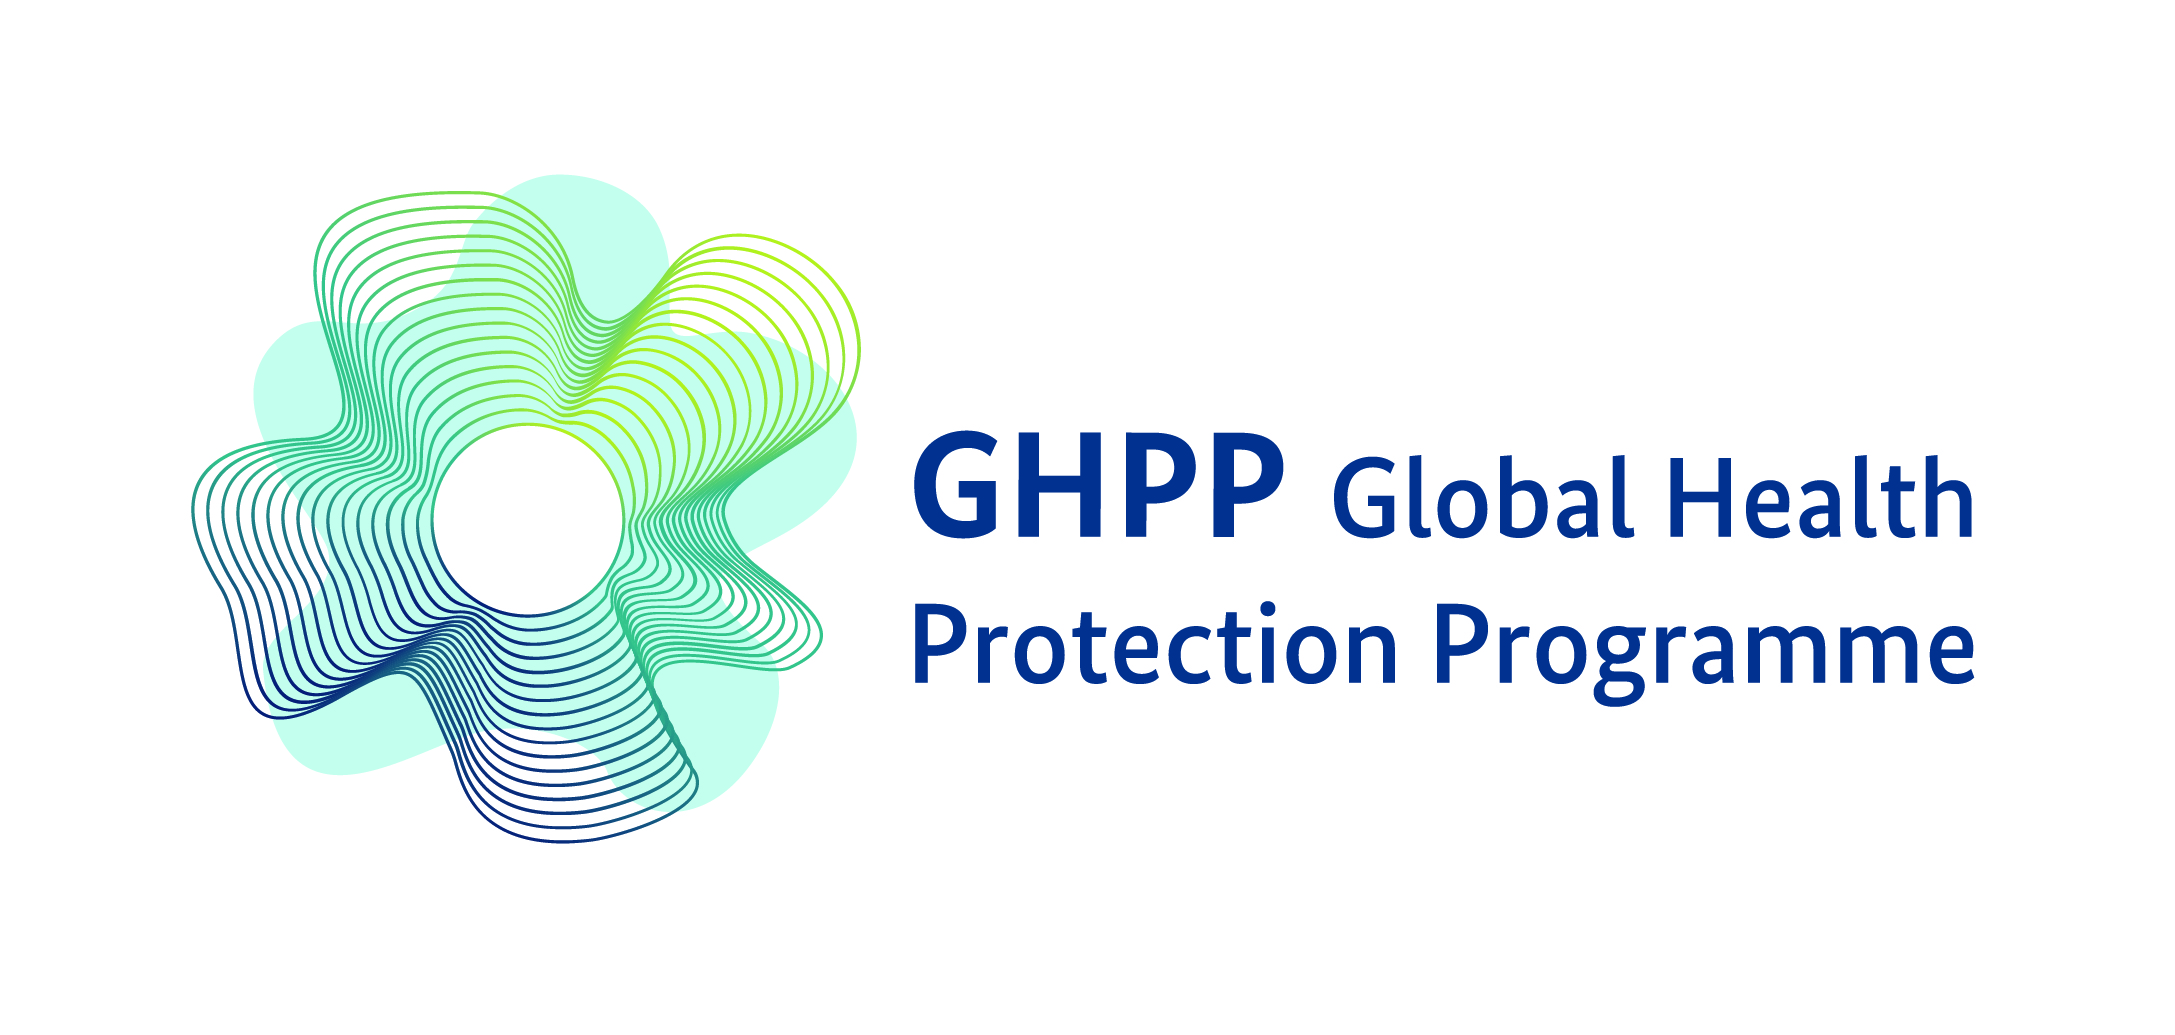 The Global Health Protection Programme